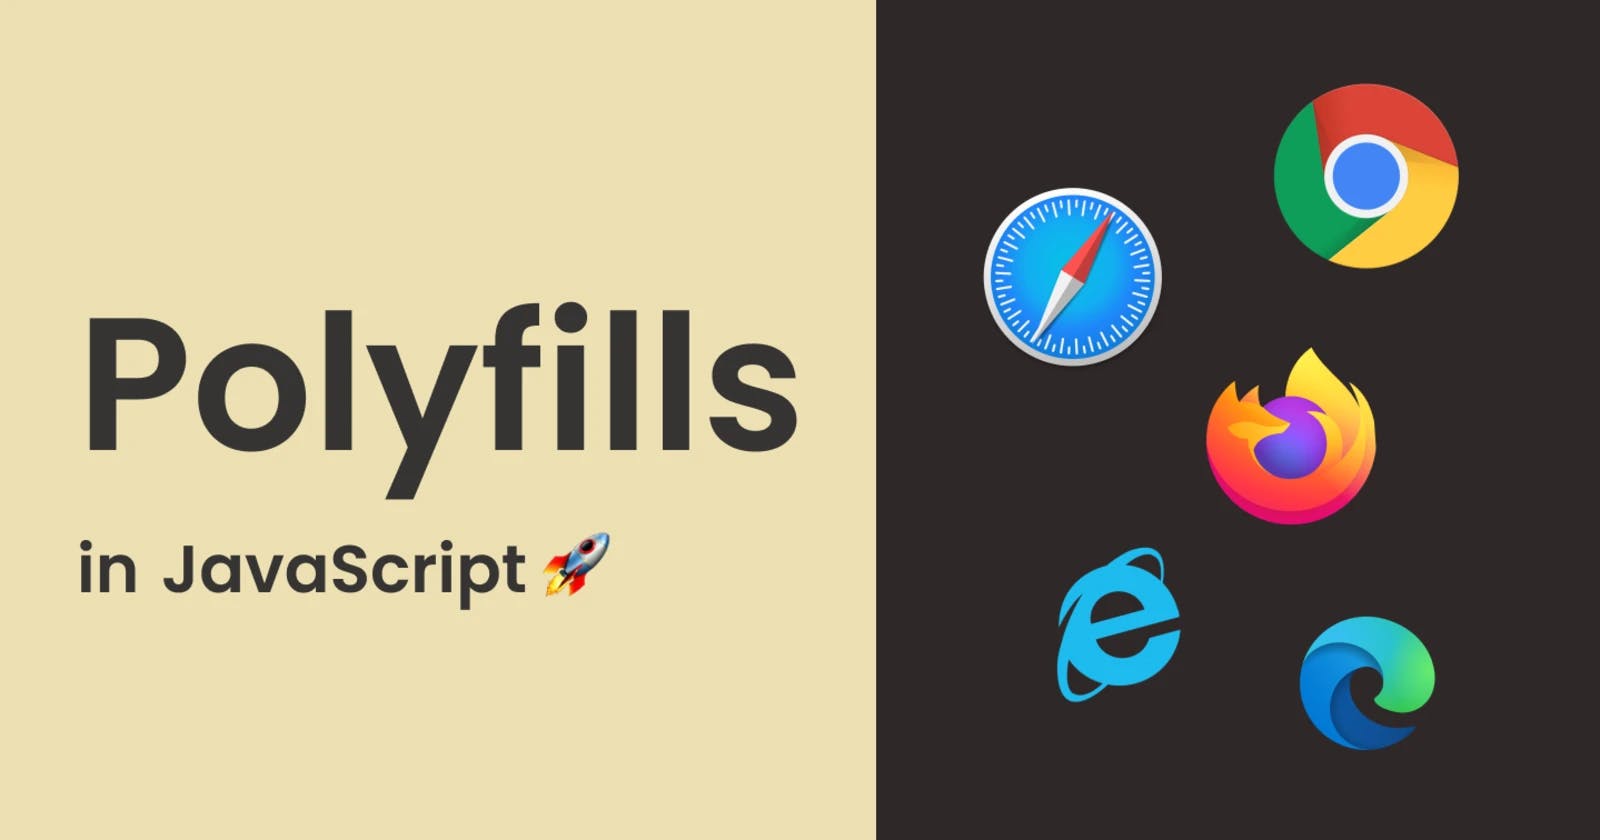 What is Pollyfills in Javascript ?